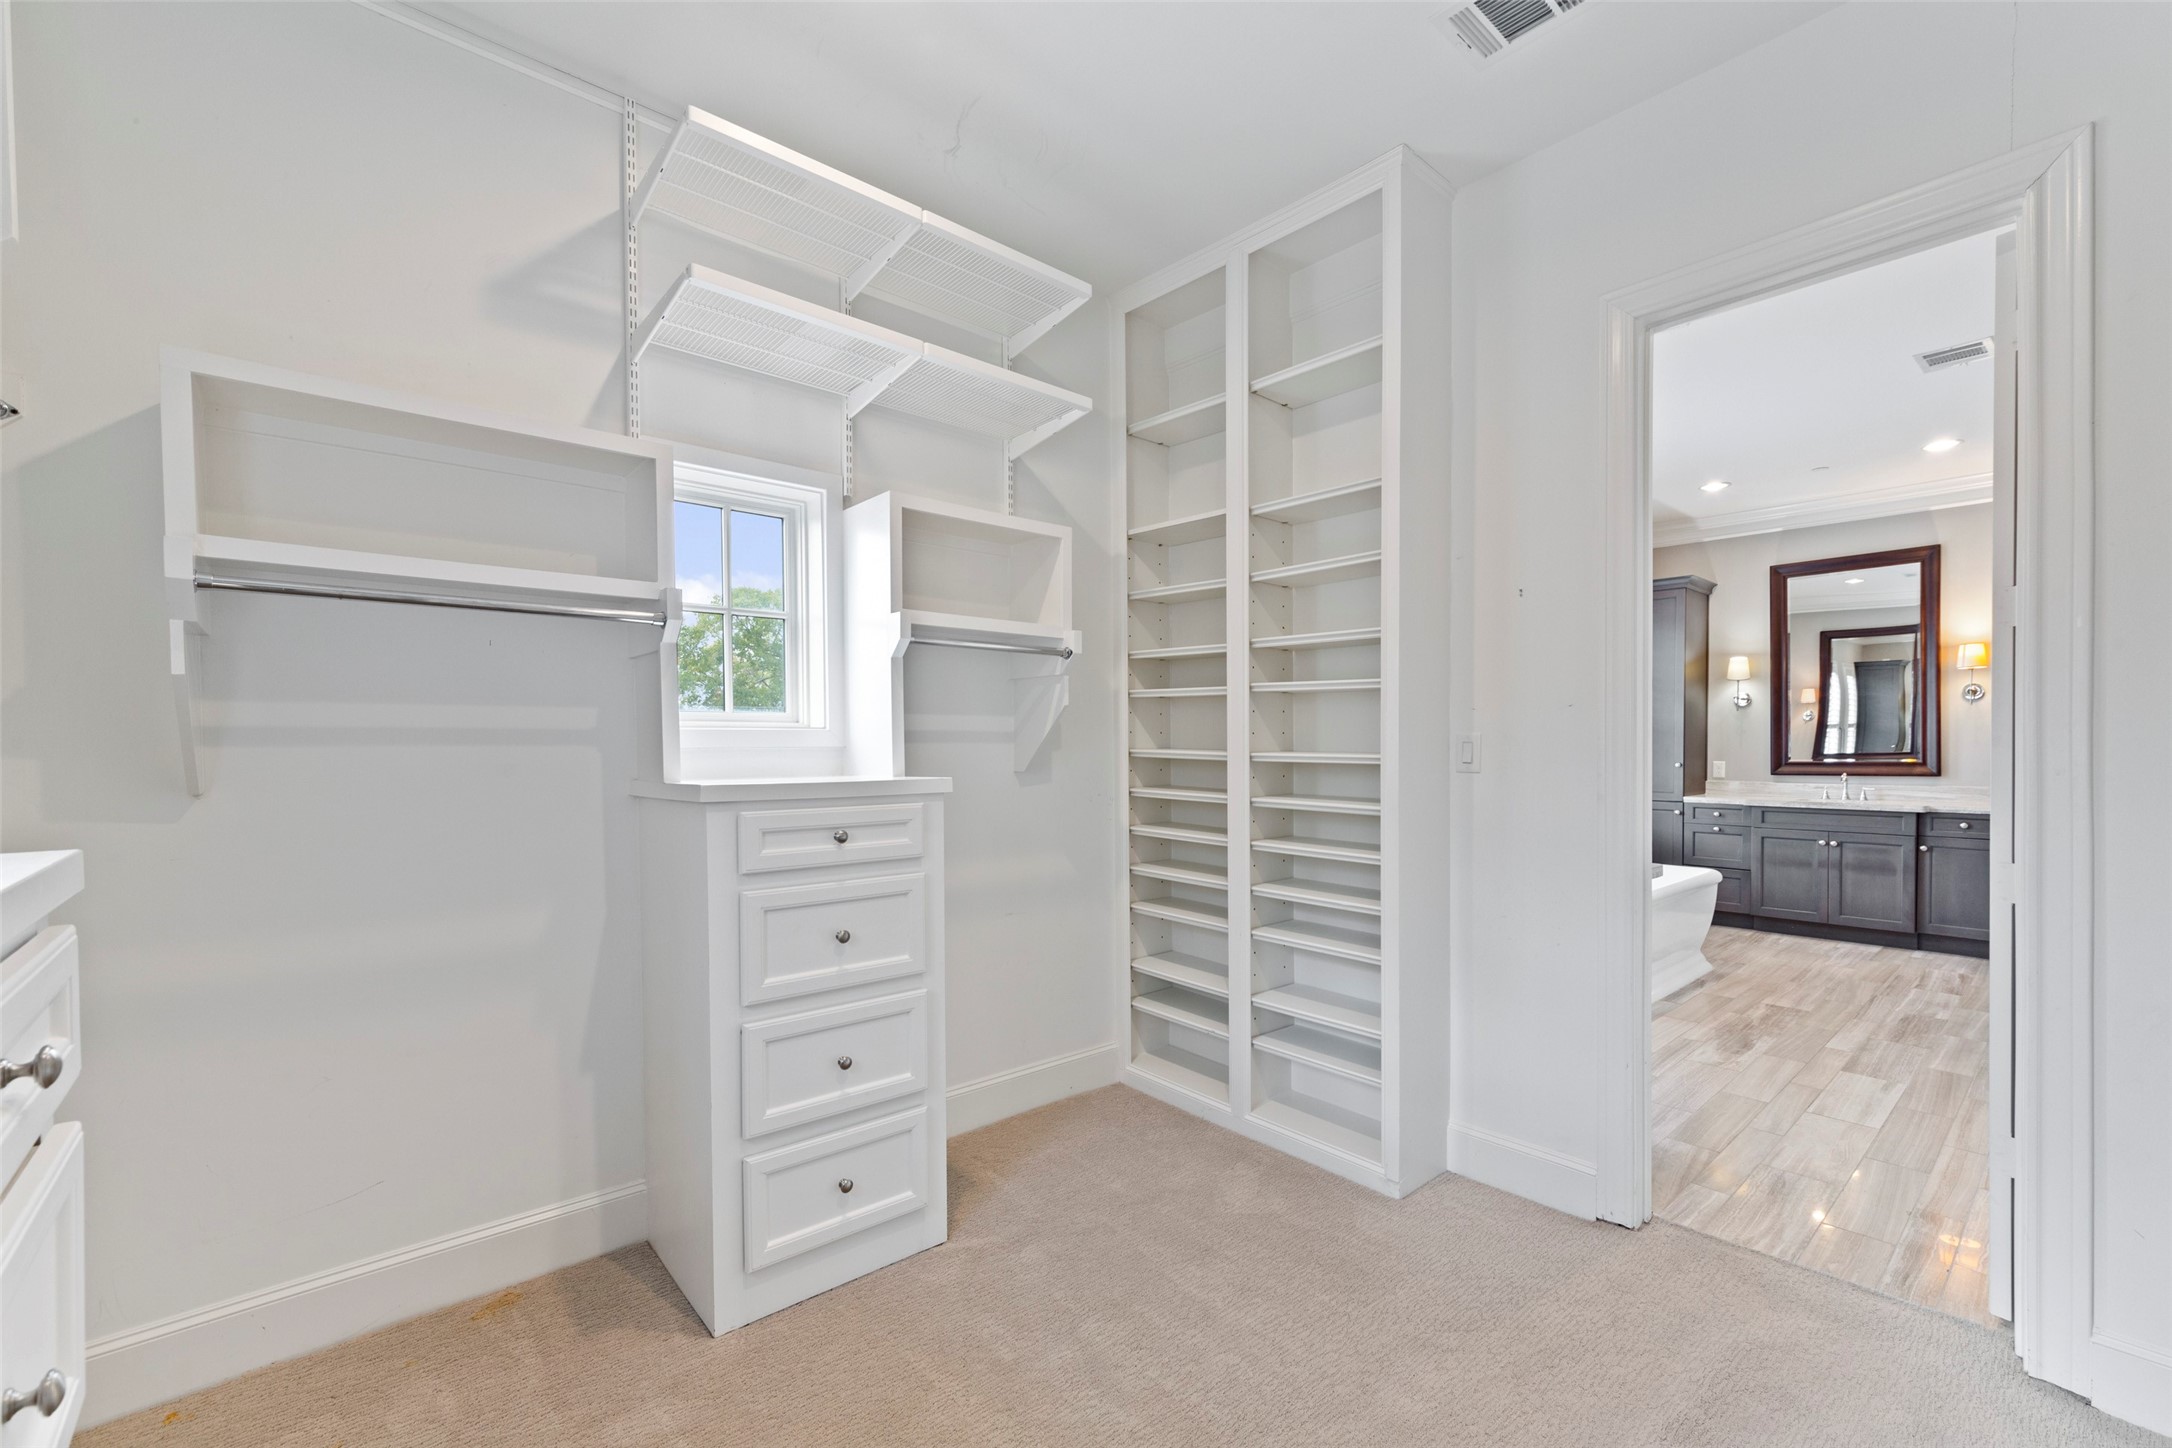 Do you have a few shoes and purses? This closet has all your storage needs covered!